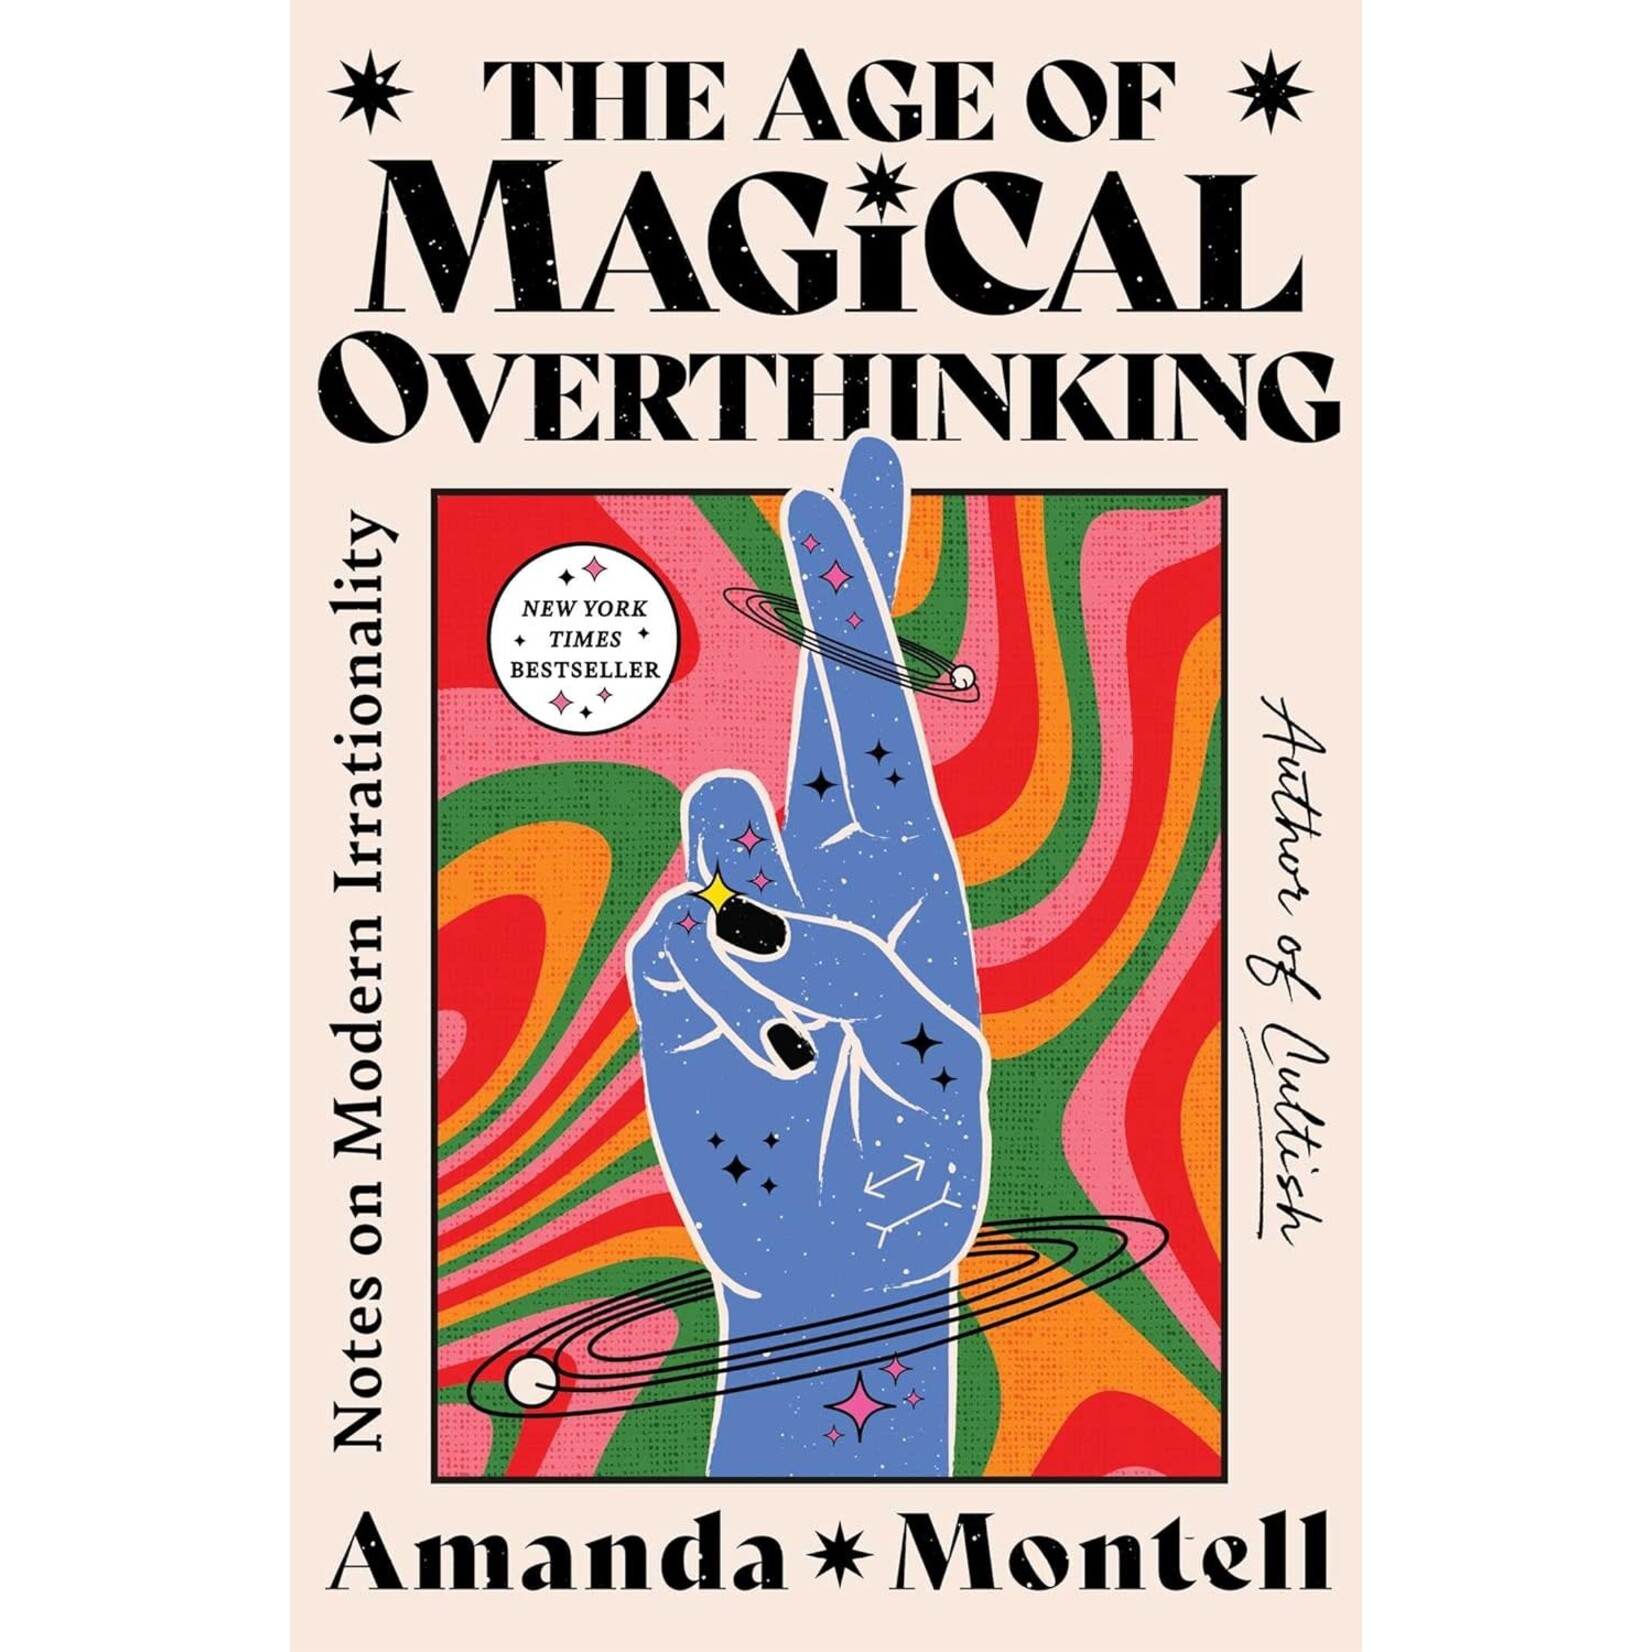 The Age of Magical Overthinking: Notes on Modern Irrationality